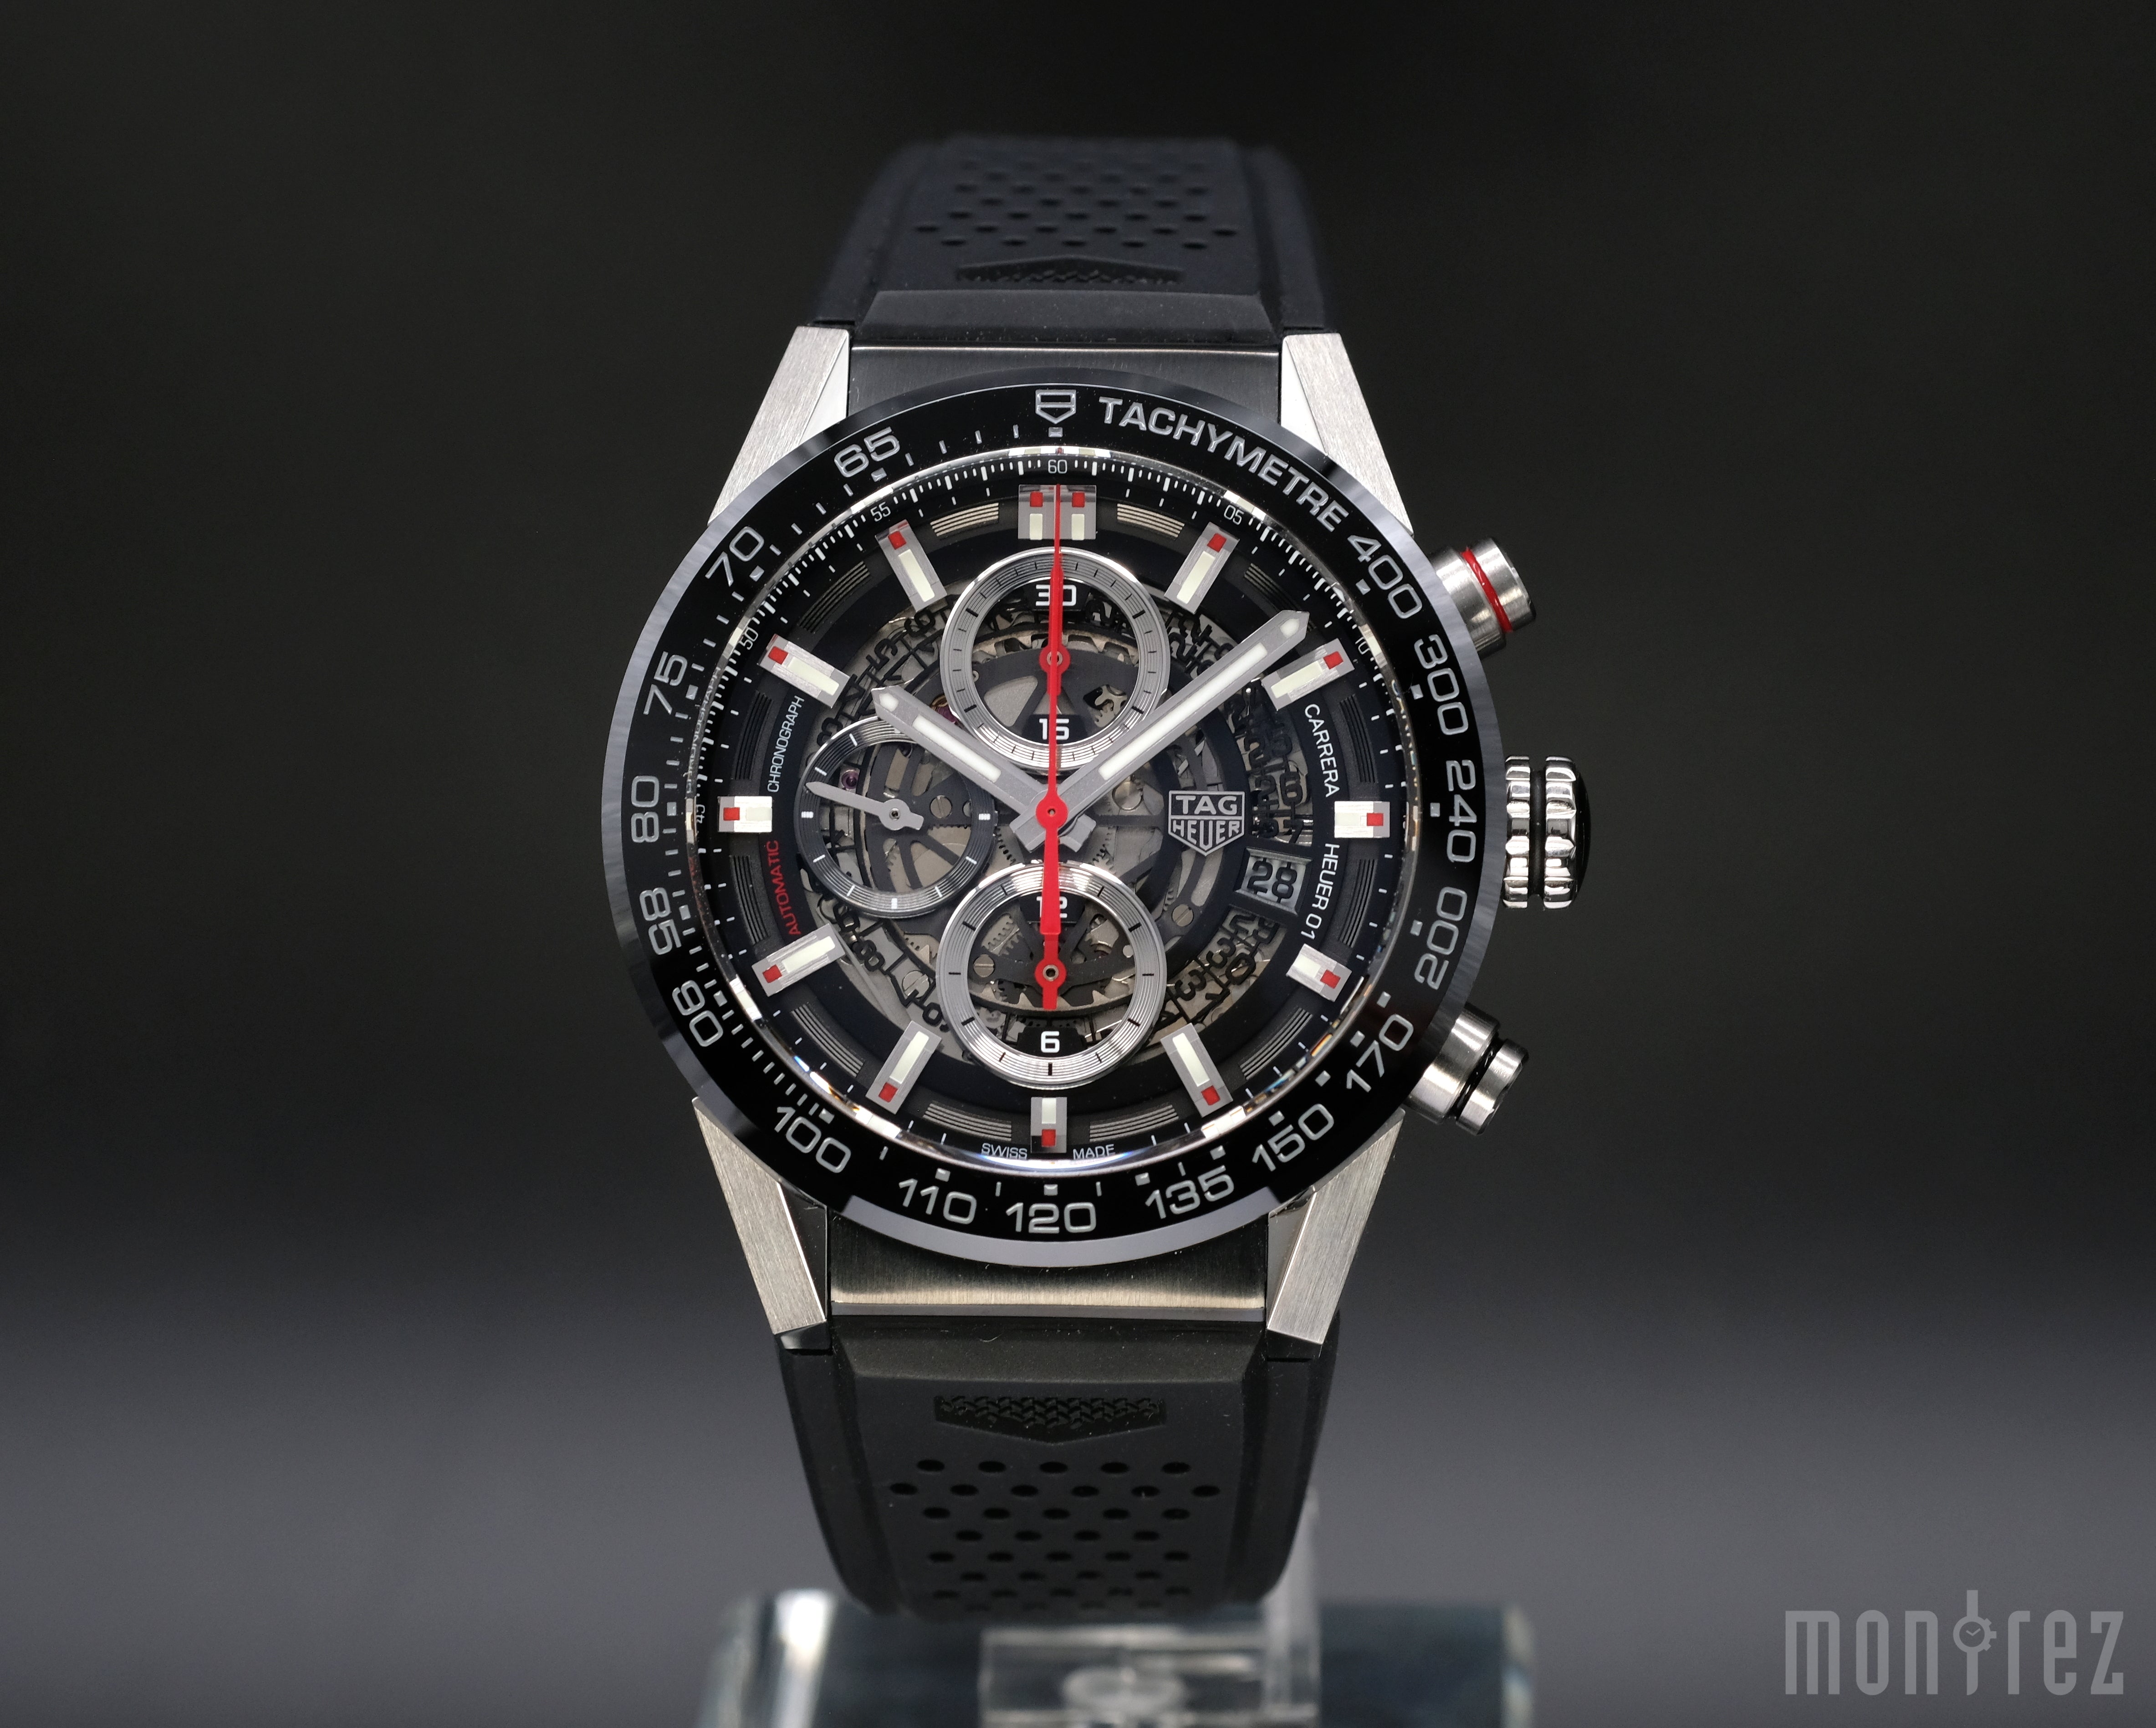 [Brand New Watch] Tag Heuer Carrera Calibre Heuer 01 Automatic Chronograph Watch 100m 43mm CAR201V.FT6046